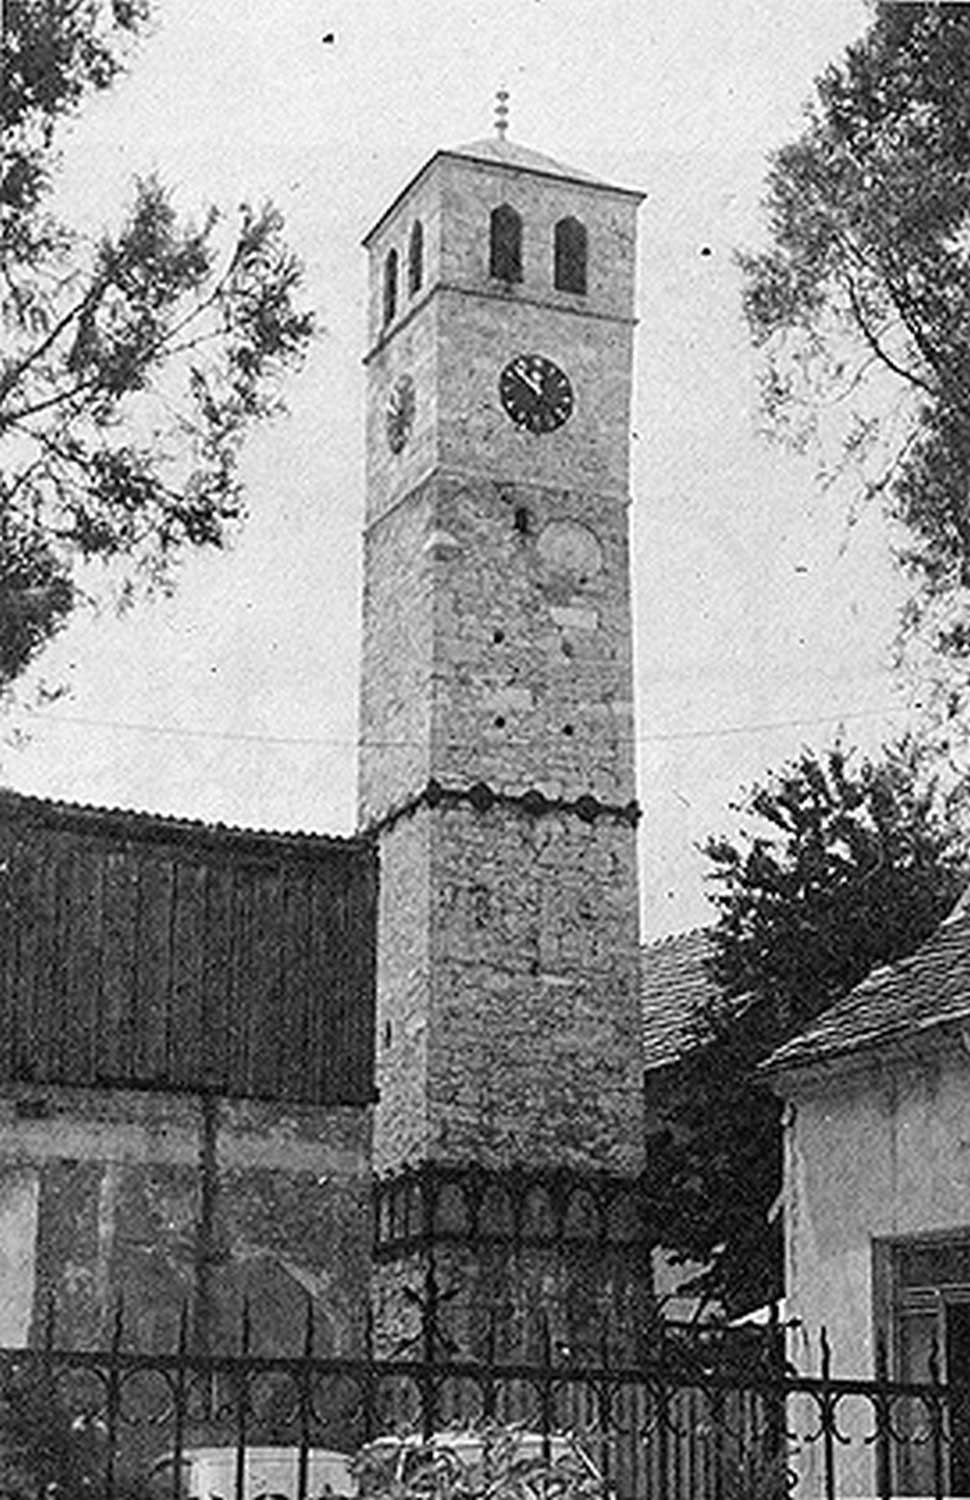 View of the clock tower (sahat kula) of Ferhad Pasha Sokolovic, when it was still standing across the street, on the west side of the mosque complex facing Ferhad Pasha's mausoleum (turbe). The clock tower was built as an Islamic endowment (waqf) by Ferhad Pasha Sokolovic in the 16th century.  Ferhad Pasha's clock tower was blown up on December 15, 1993, seven months after the Ferhadija mosque was blown up and razed.  It has not been rebuilt as of 2016.